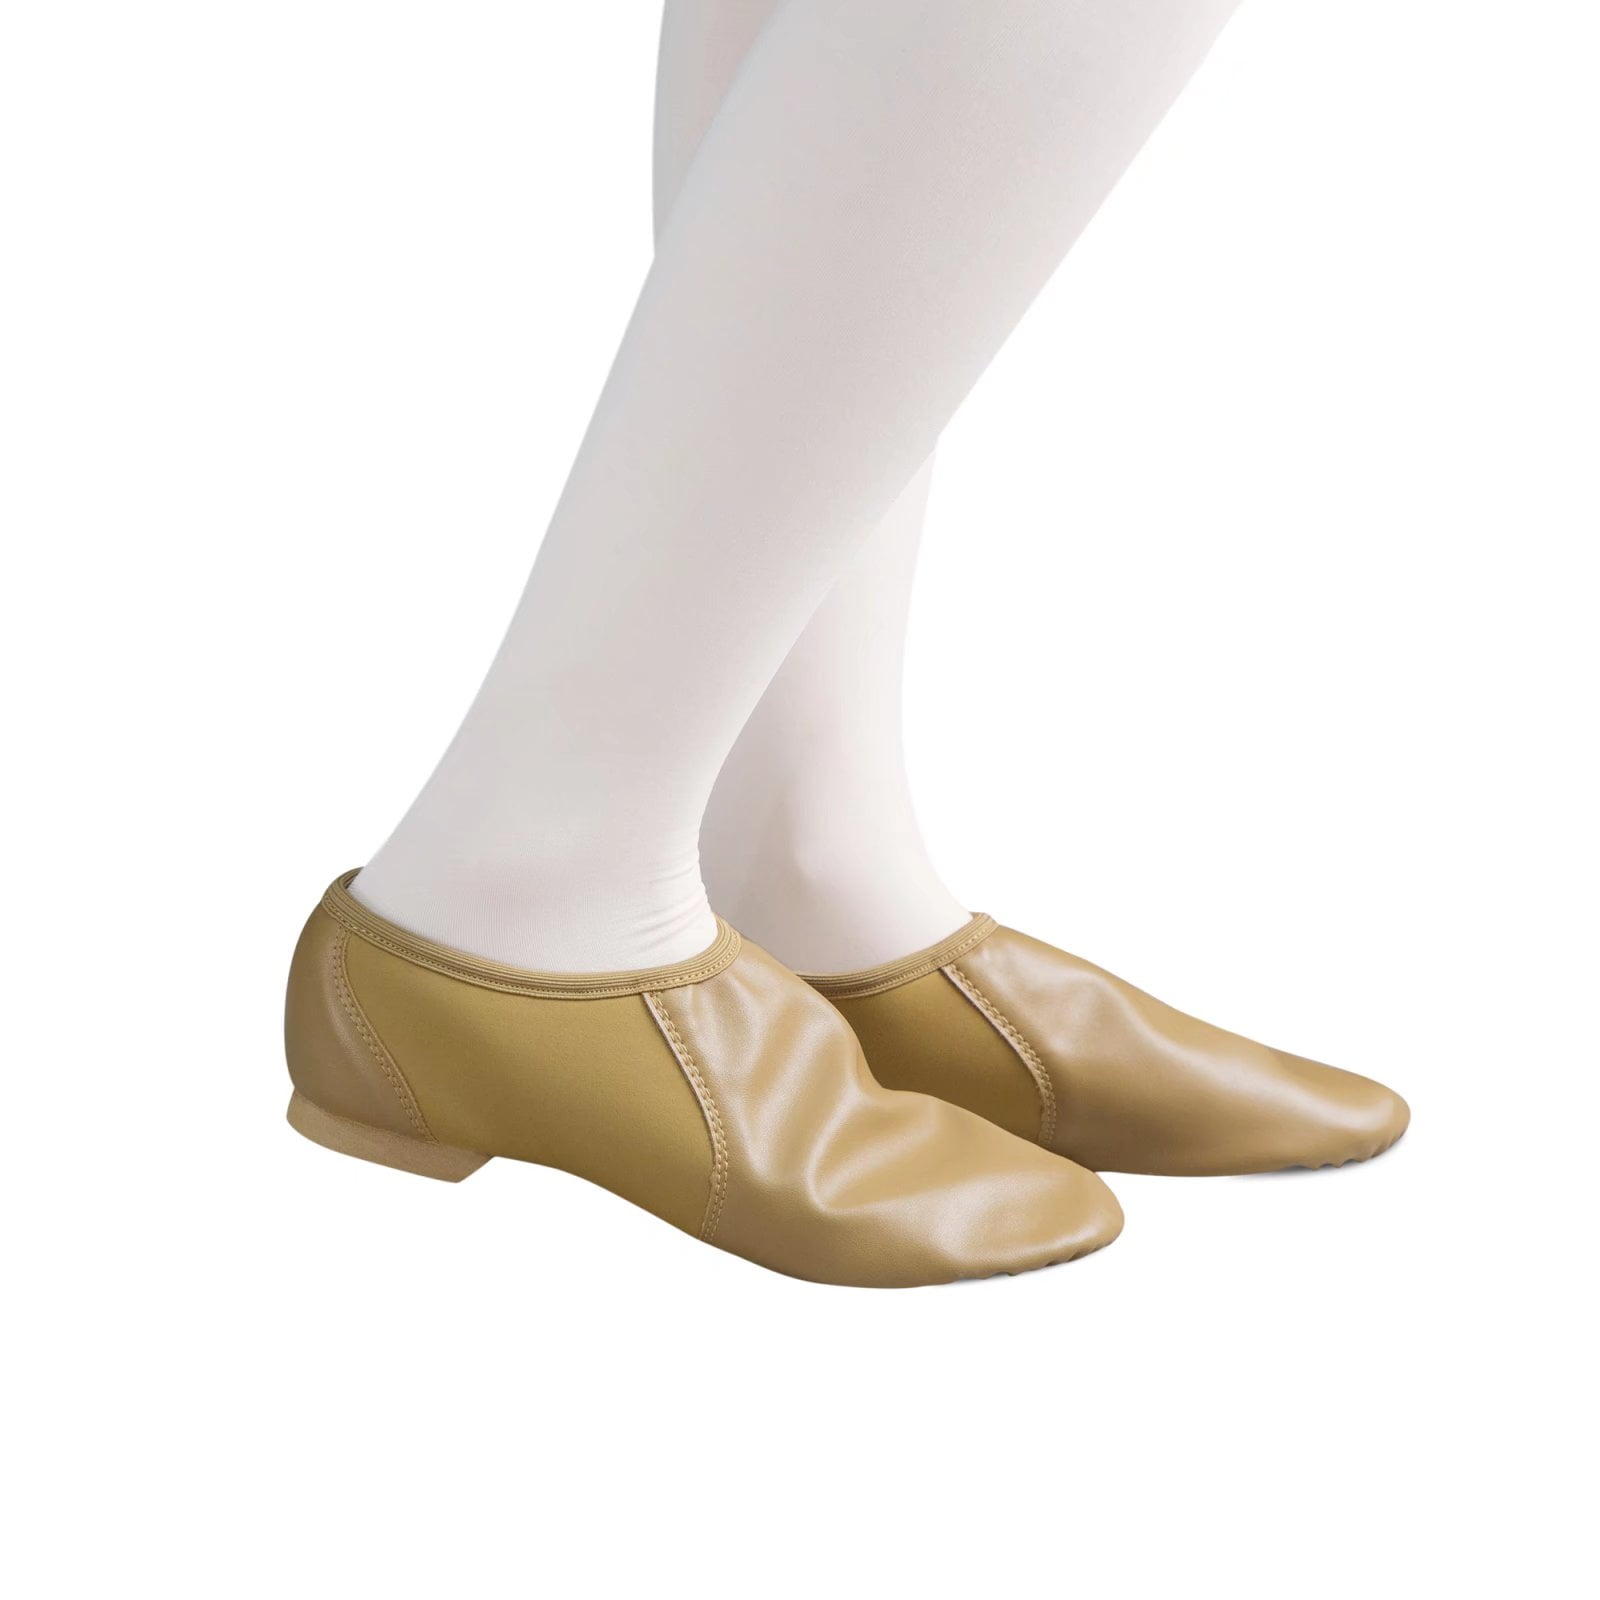 MODERN DANCE SHOES JUNIOR 7 - ADULT 11 WHITE LEATHER RUBBER SOLED JAZZ